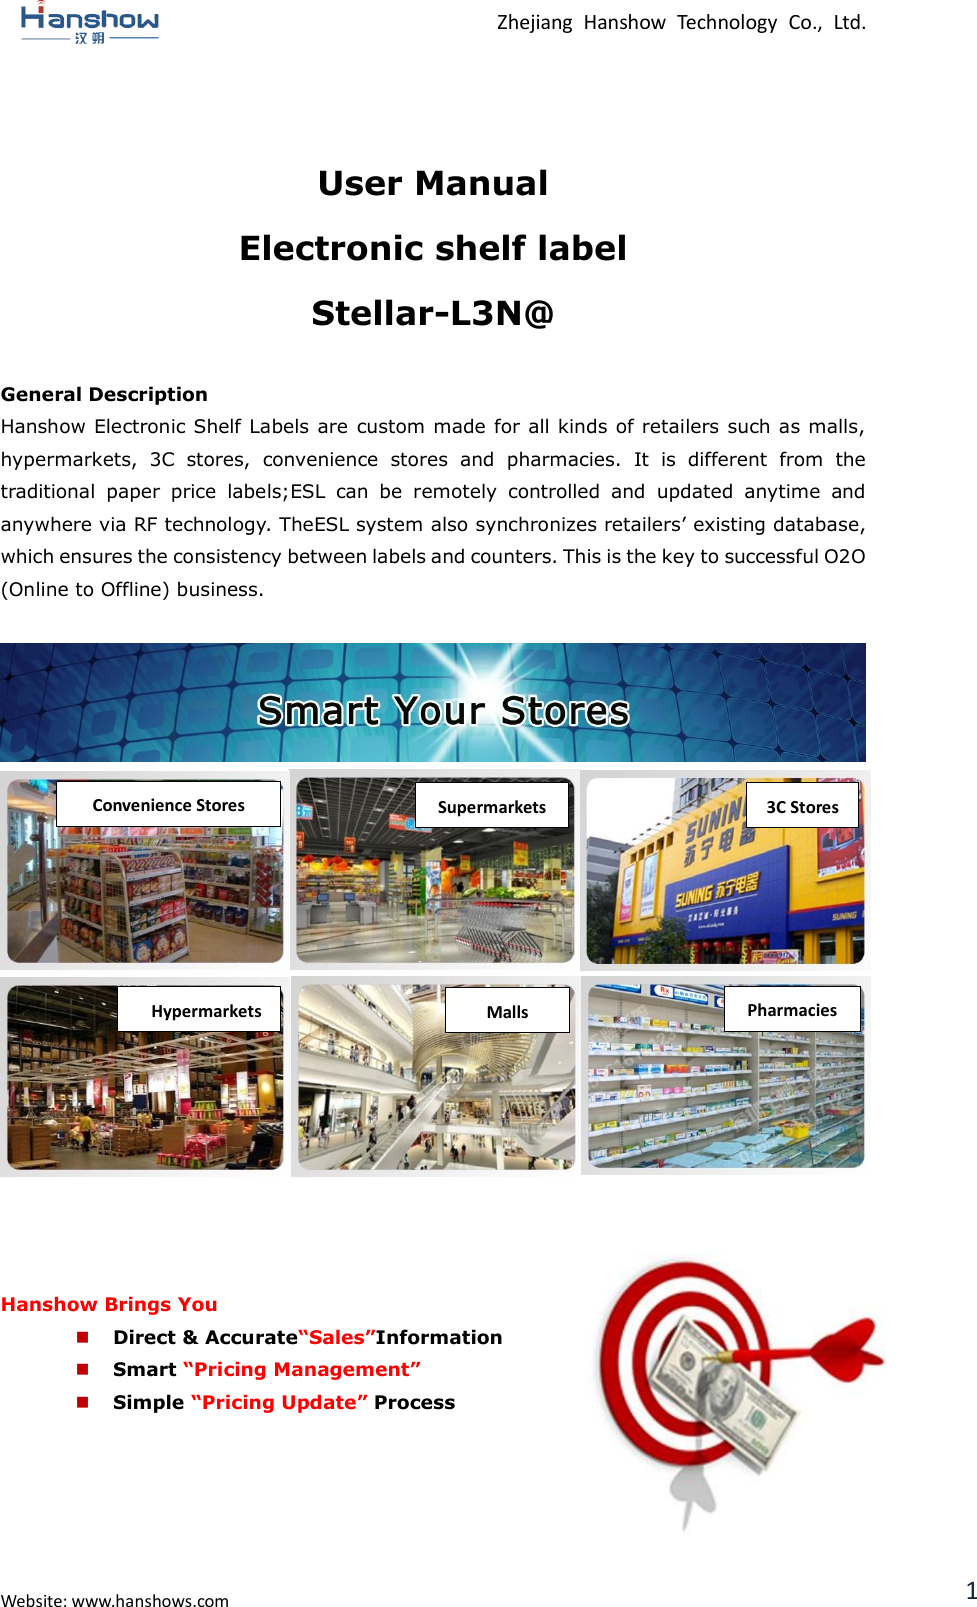  Zhejiang  Hanshow  Technology  Co.,  Ltd.   Website: www.hanshows.com 1  User Manual Electronic shelf label Stellar-L3N@  General Description Hanshow Electronic Shelf Labels are custom made for all kinds of retailers such as malls, hypermarkets,  3C  stores,  convenience  stores  and  pharmacies.  It  is  different  from  the traditional  paper  price  labels;ESL  can  be  remotely  controlled  and  updated  anytime  and anywhere via RF technology. TheESL system also synchronizes retailers’ existing database, which ensures the consistency between labels and counters. This is the key to successful O2O (Online to Offline) business.                     Hanshow Brings You  Direct &amp; Accurate“Sales”Information  Smart “Pricing Management”  Simple “Pricing Update” Process      Convenience Stores Supermarkets 3C Stores Pharmacies Malls Hypermarkets G-MALL 